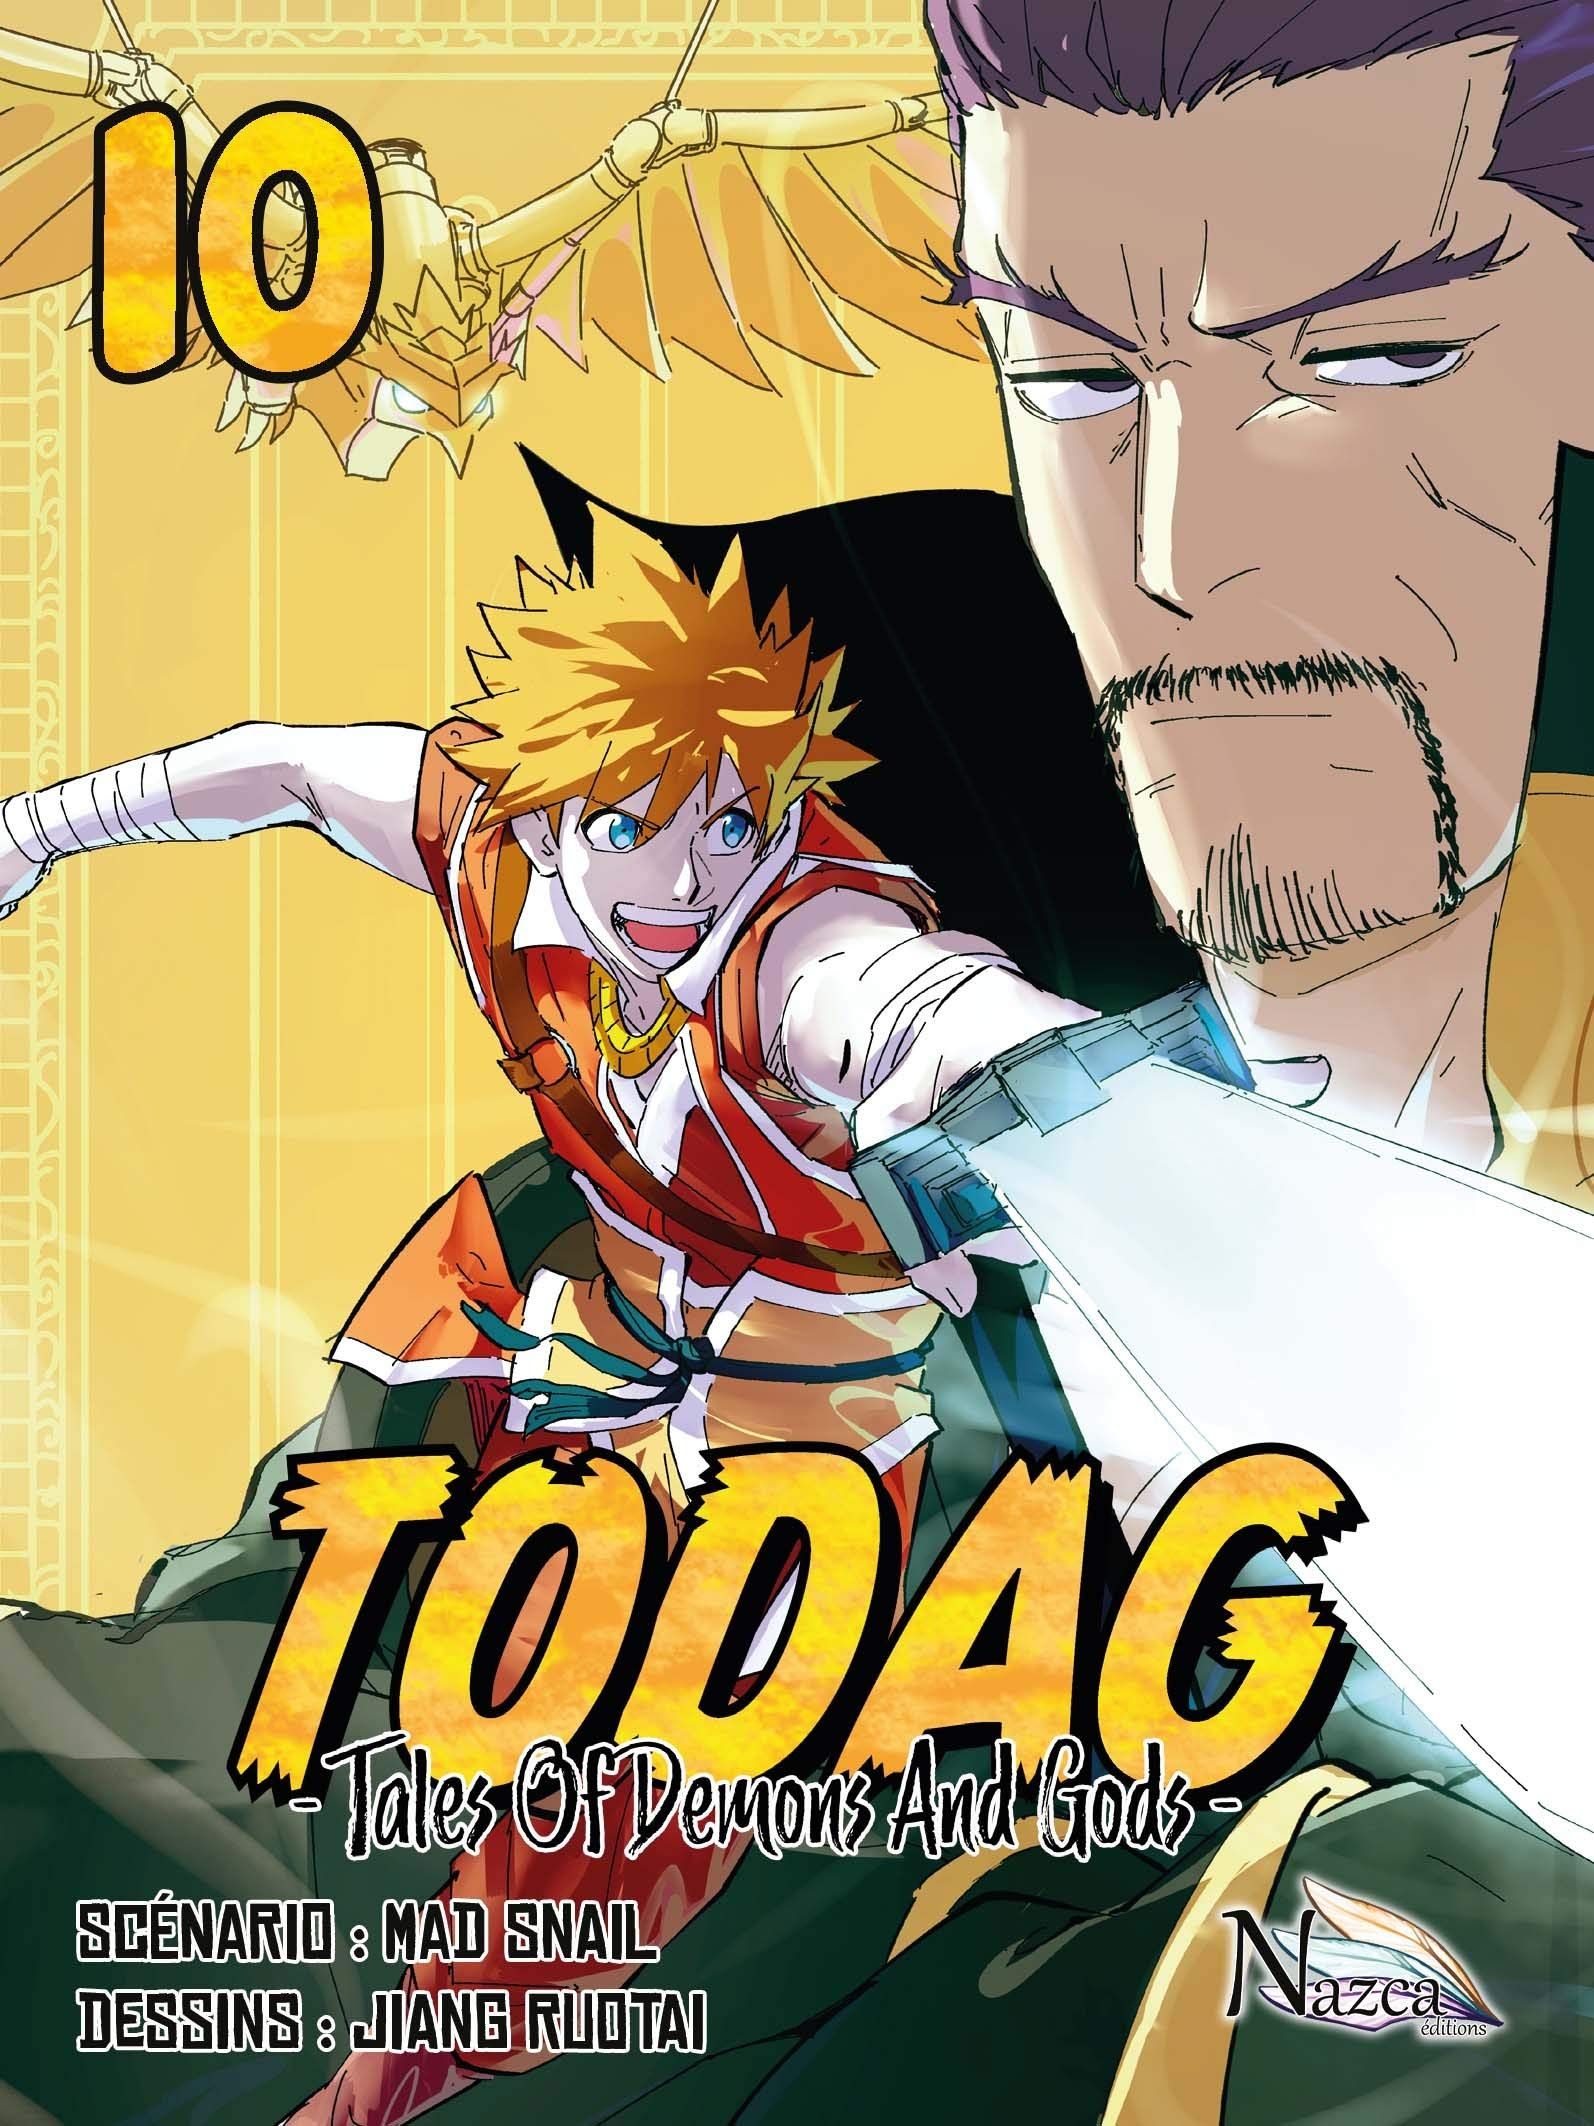 TODAG - Tales of Demons and Gods Vol.10